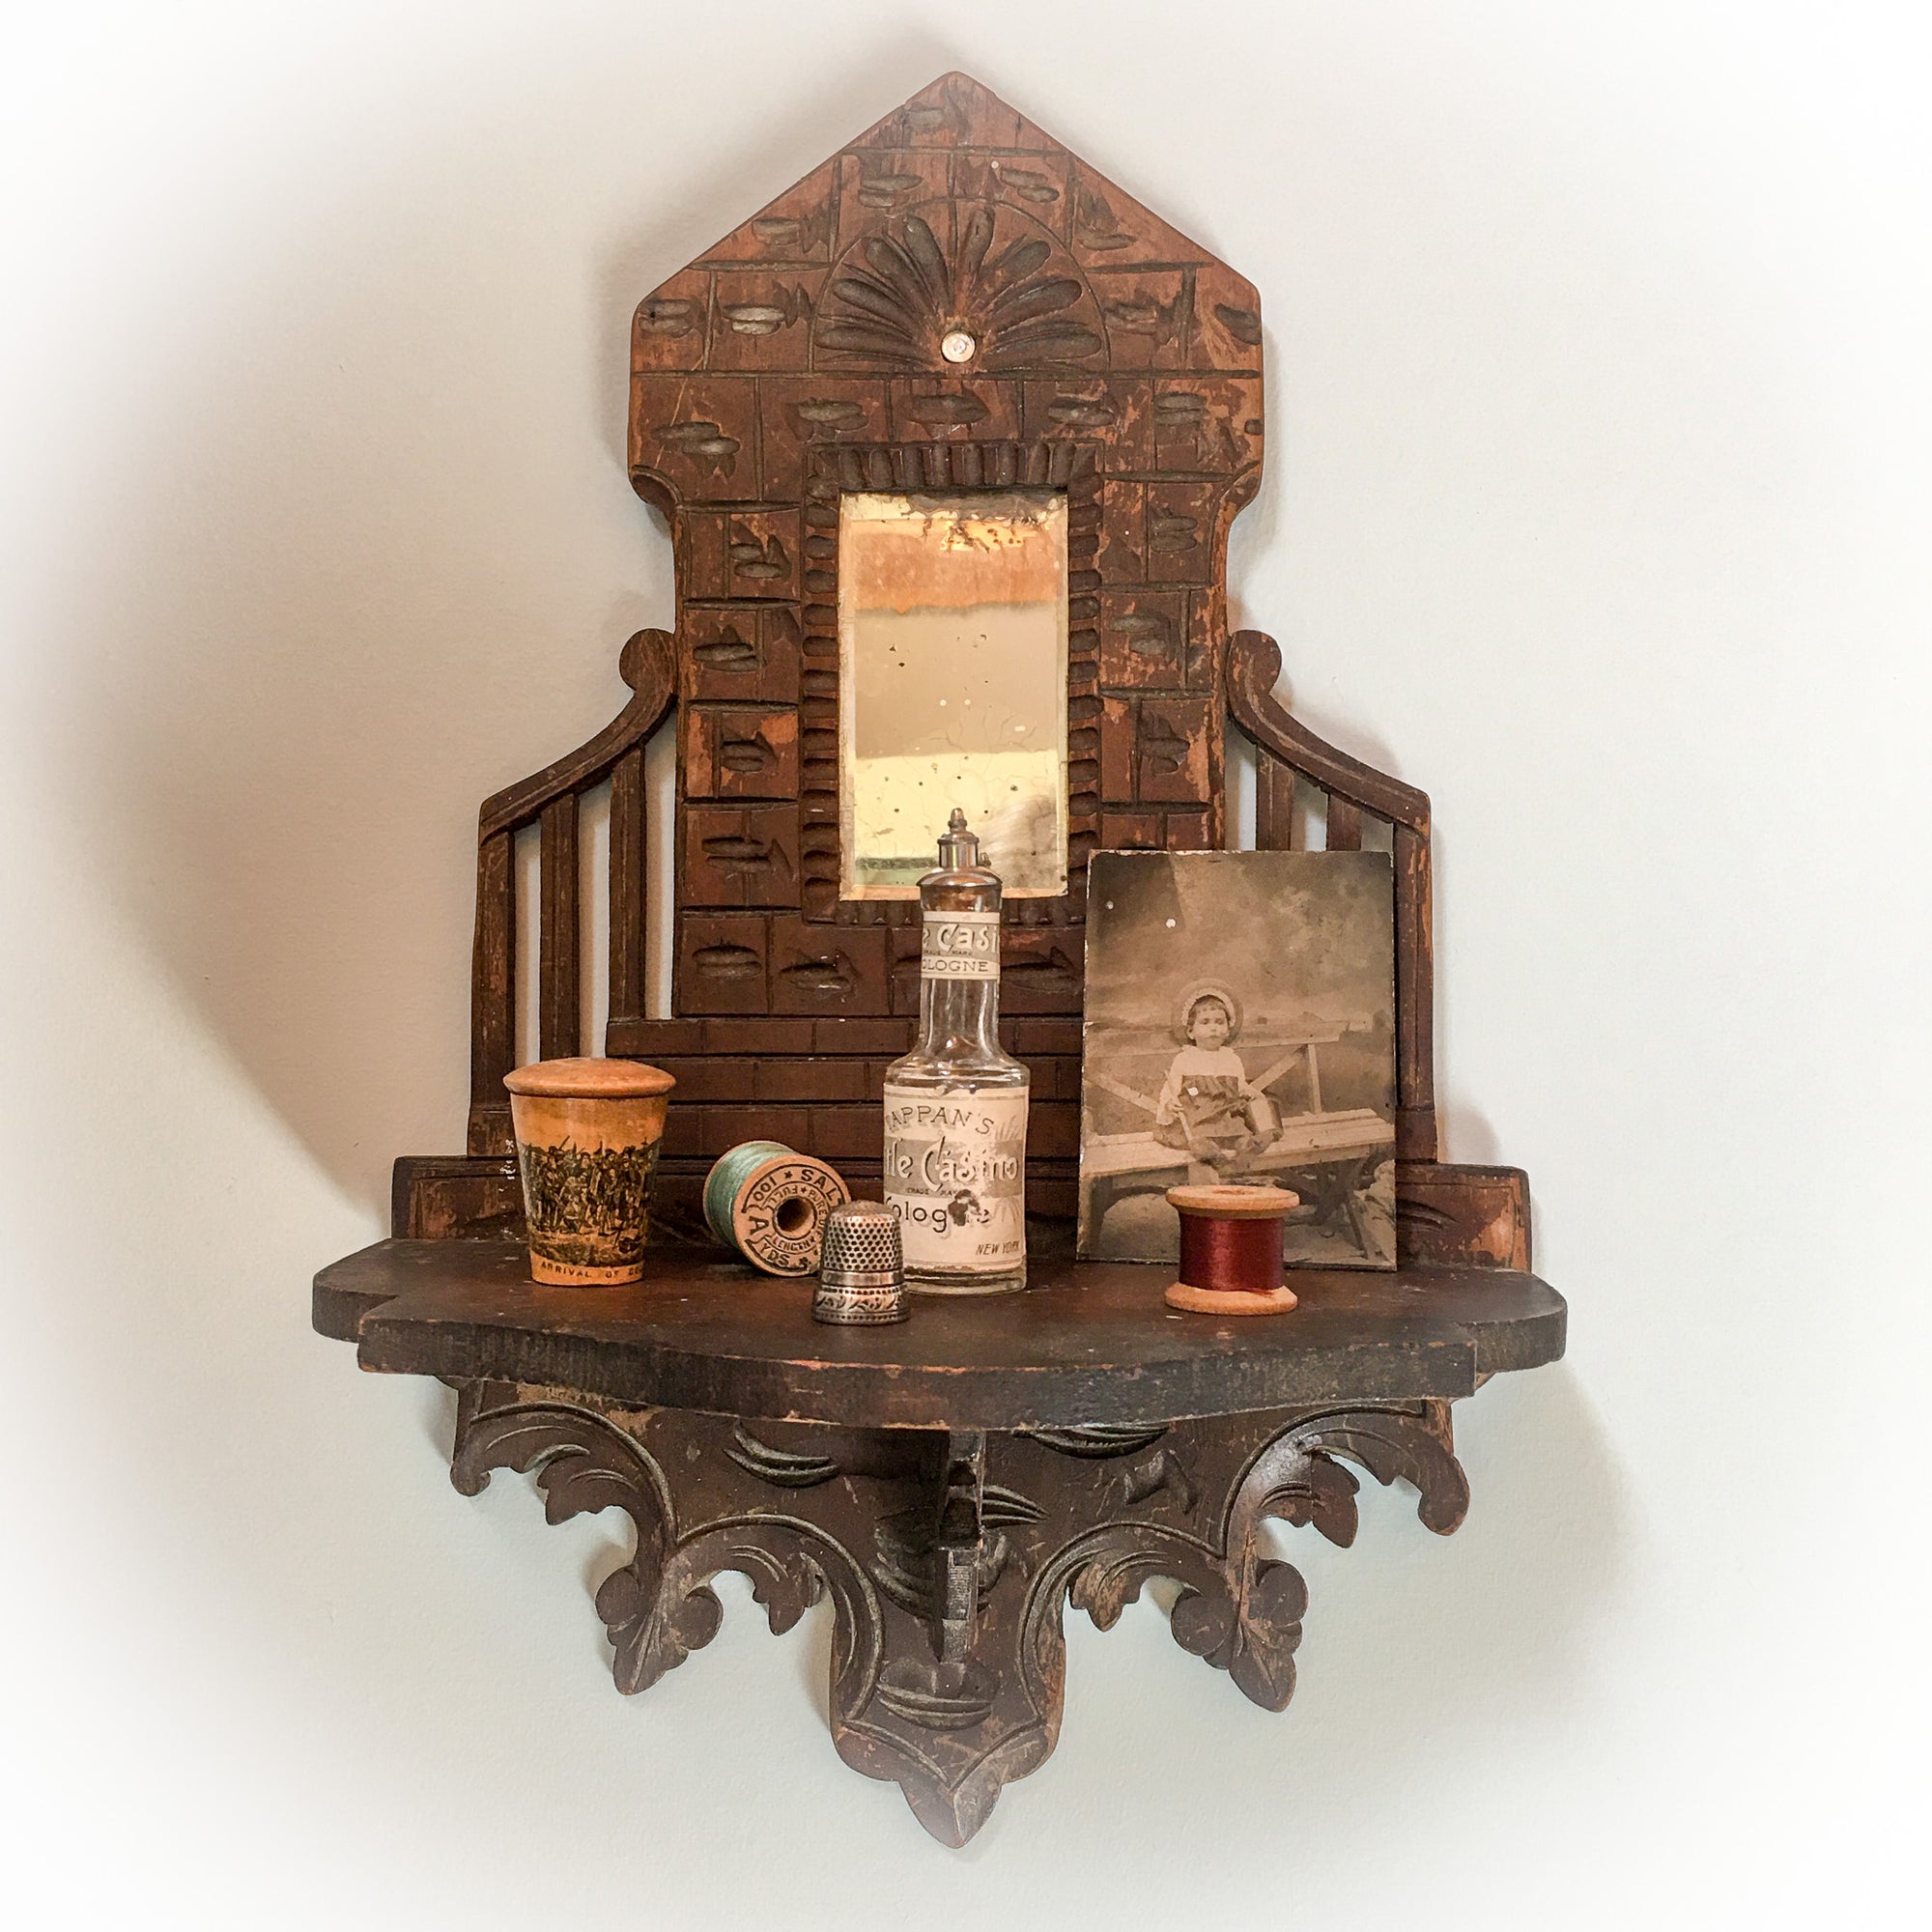 Mid 1800’s Hand Crafted Folding Wall Shelf with Smoky Mirror